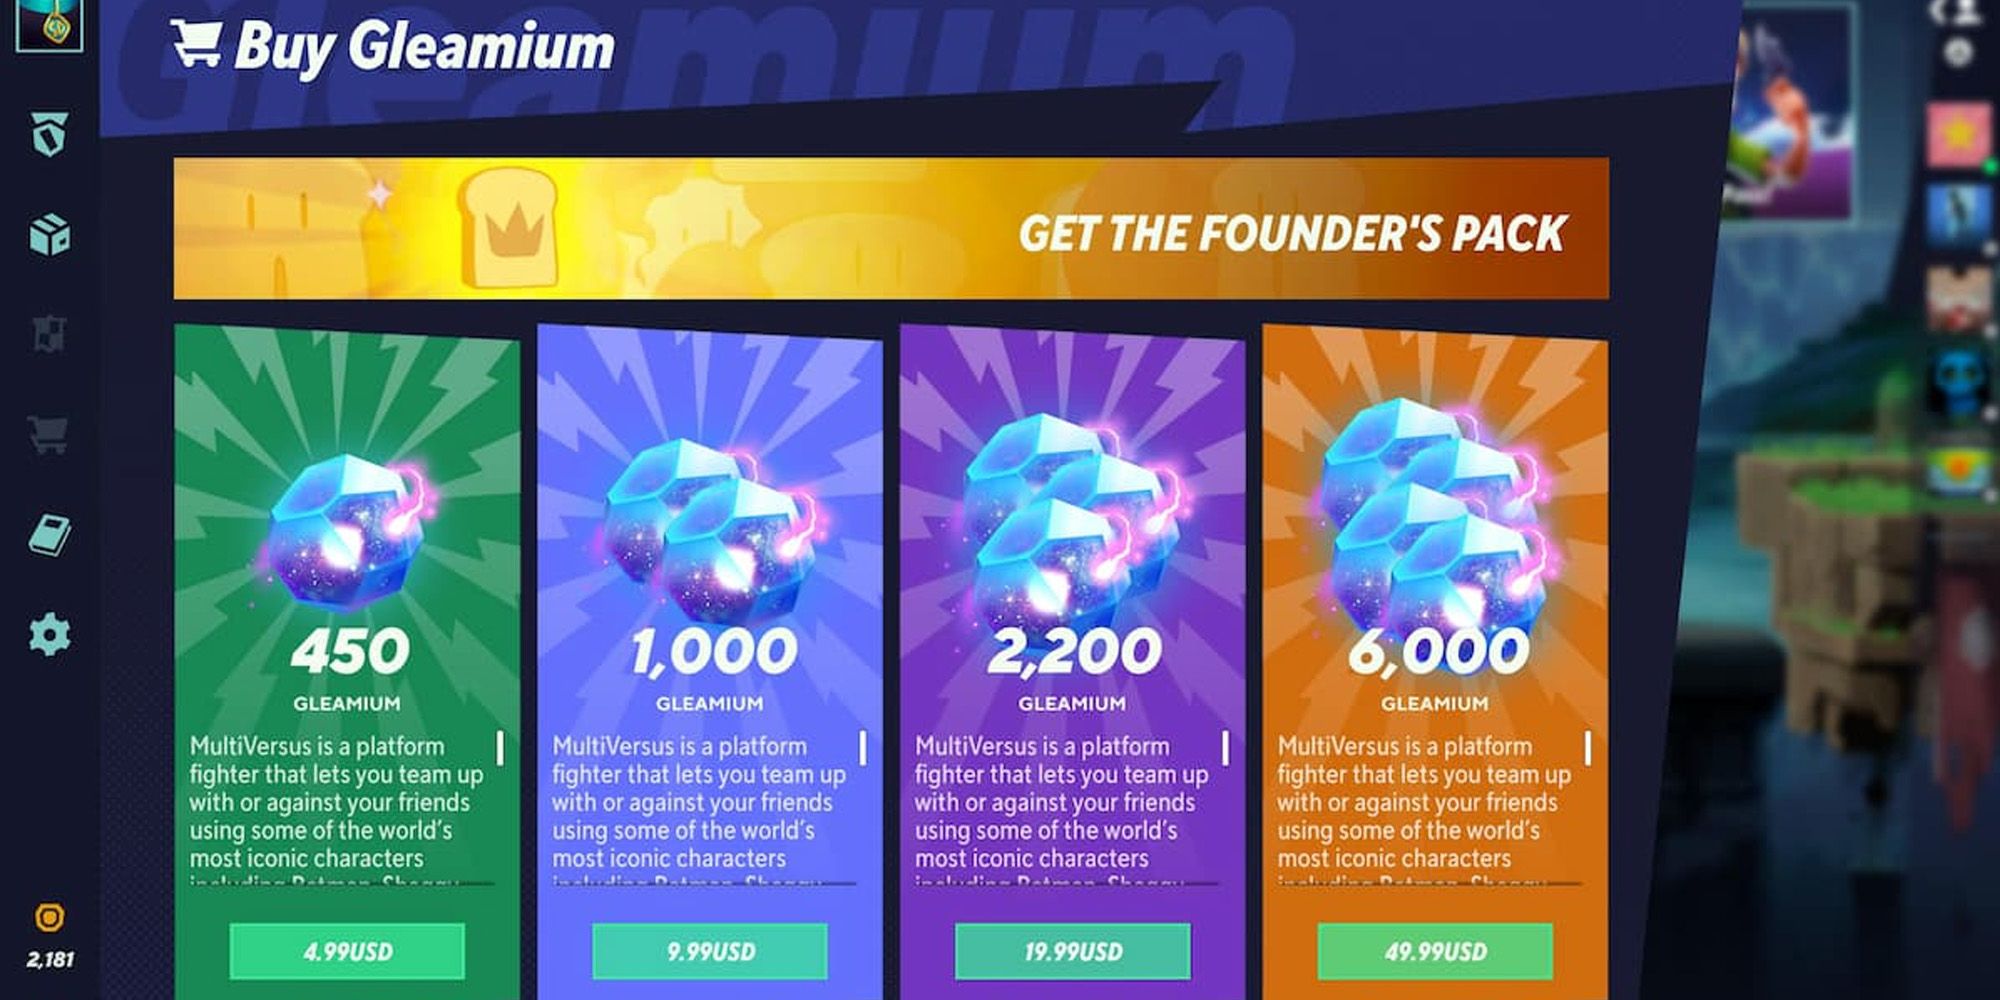 MultiVersus Buy Gleamium in-game store purchase